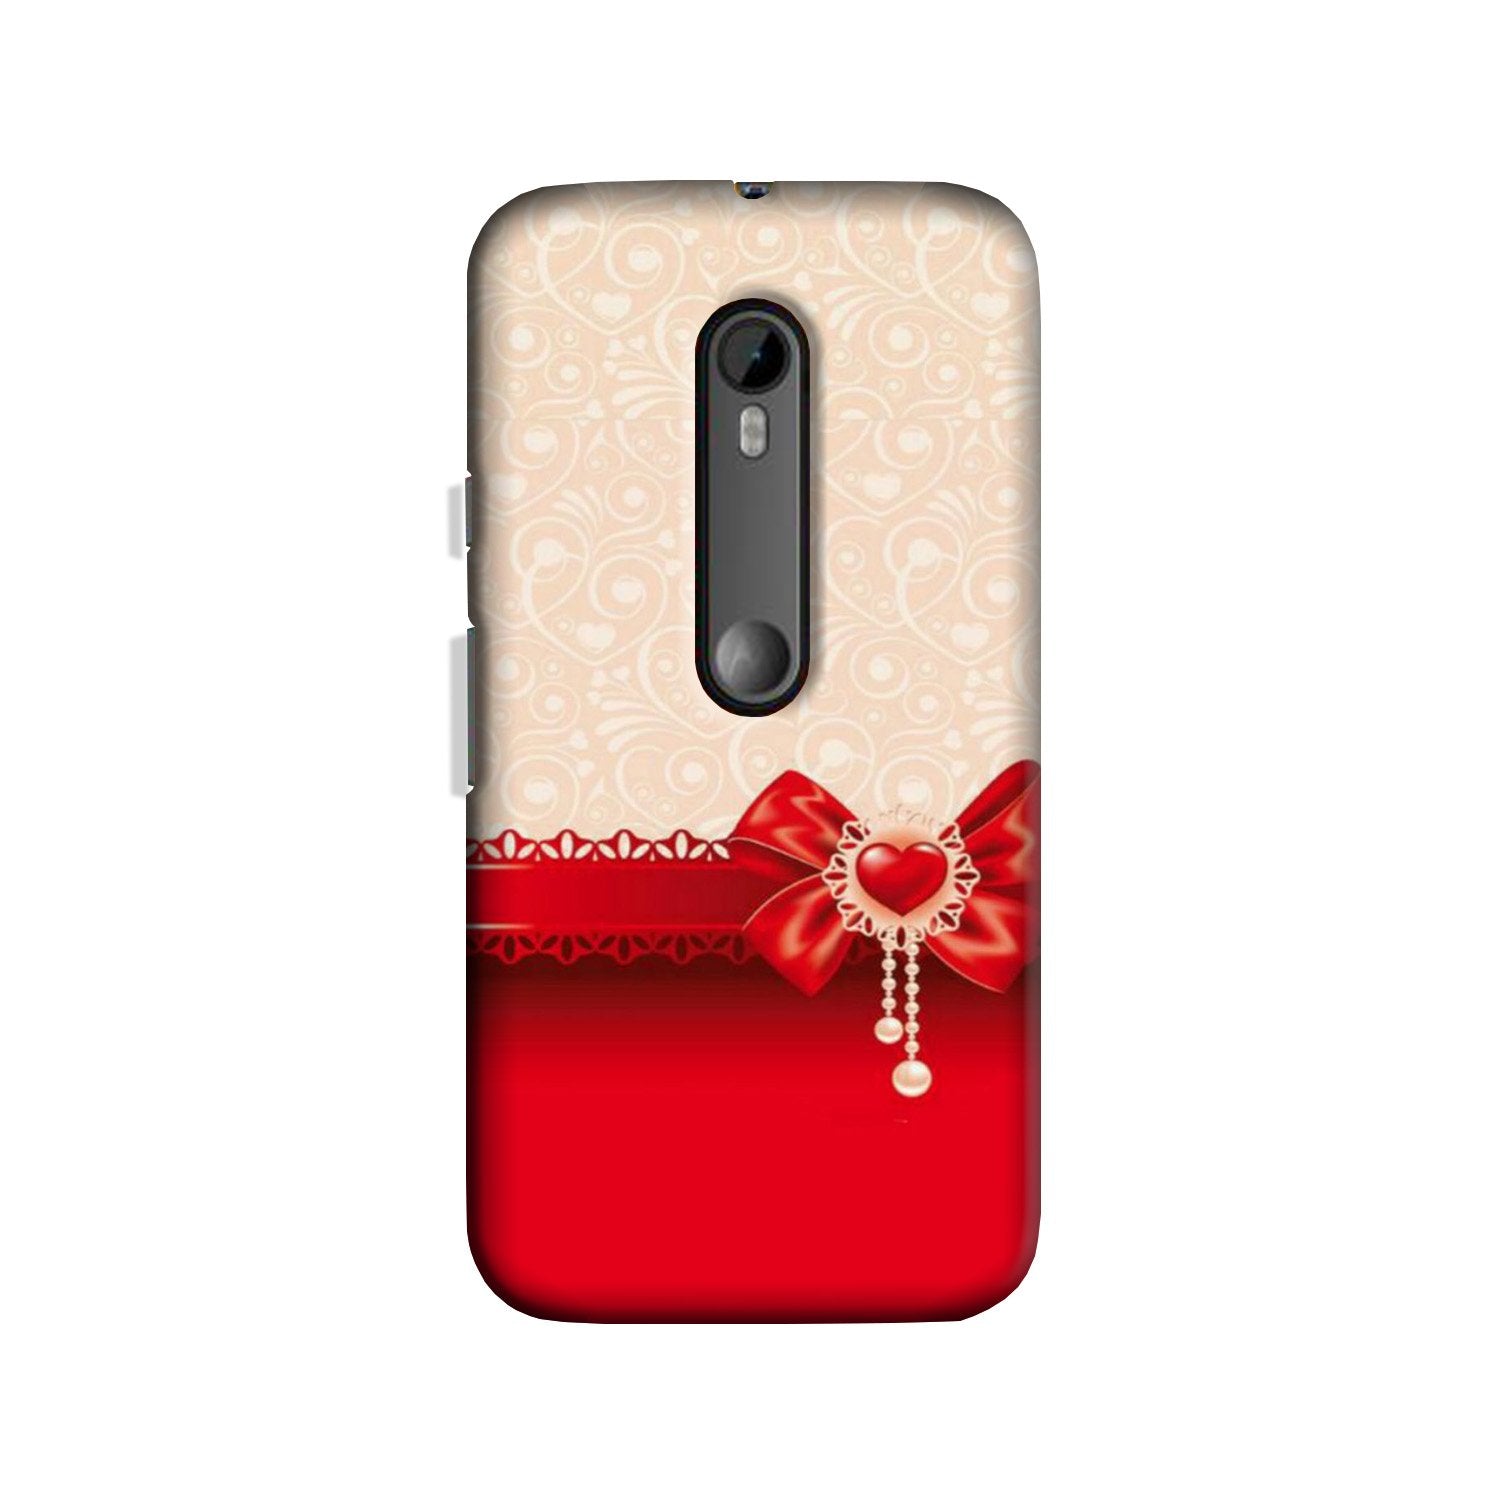 Gift Wrap3 Case for Moto X Force